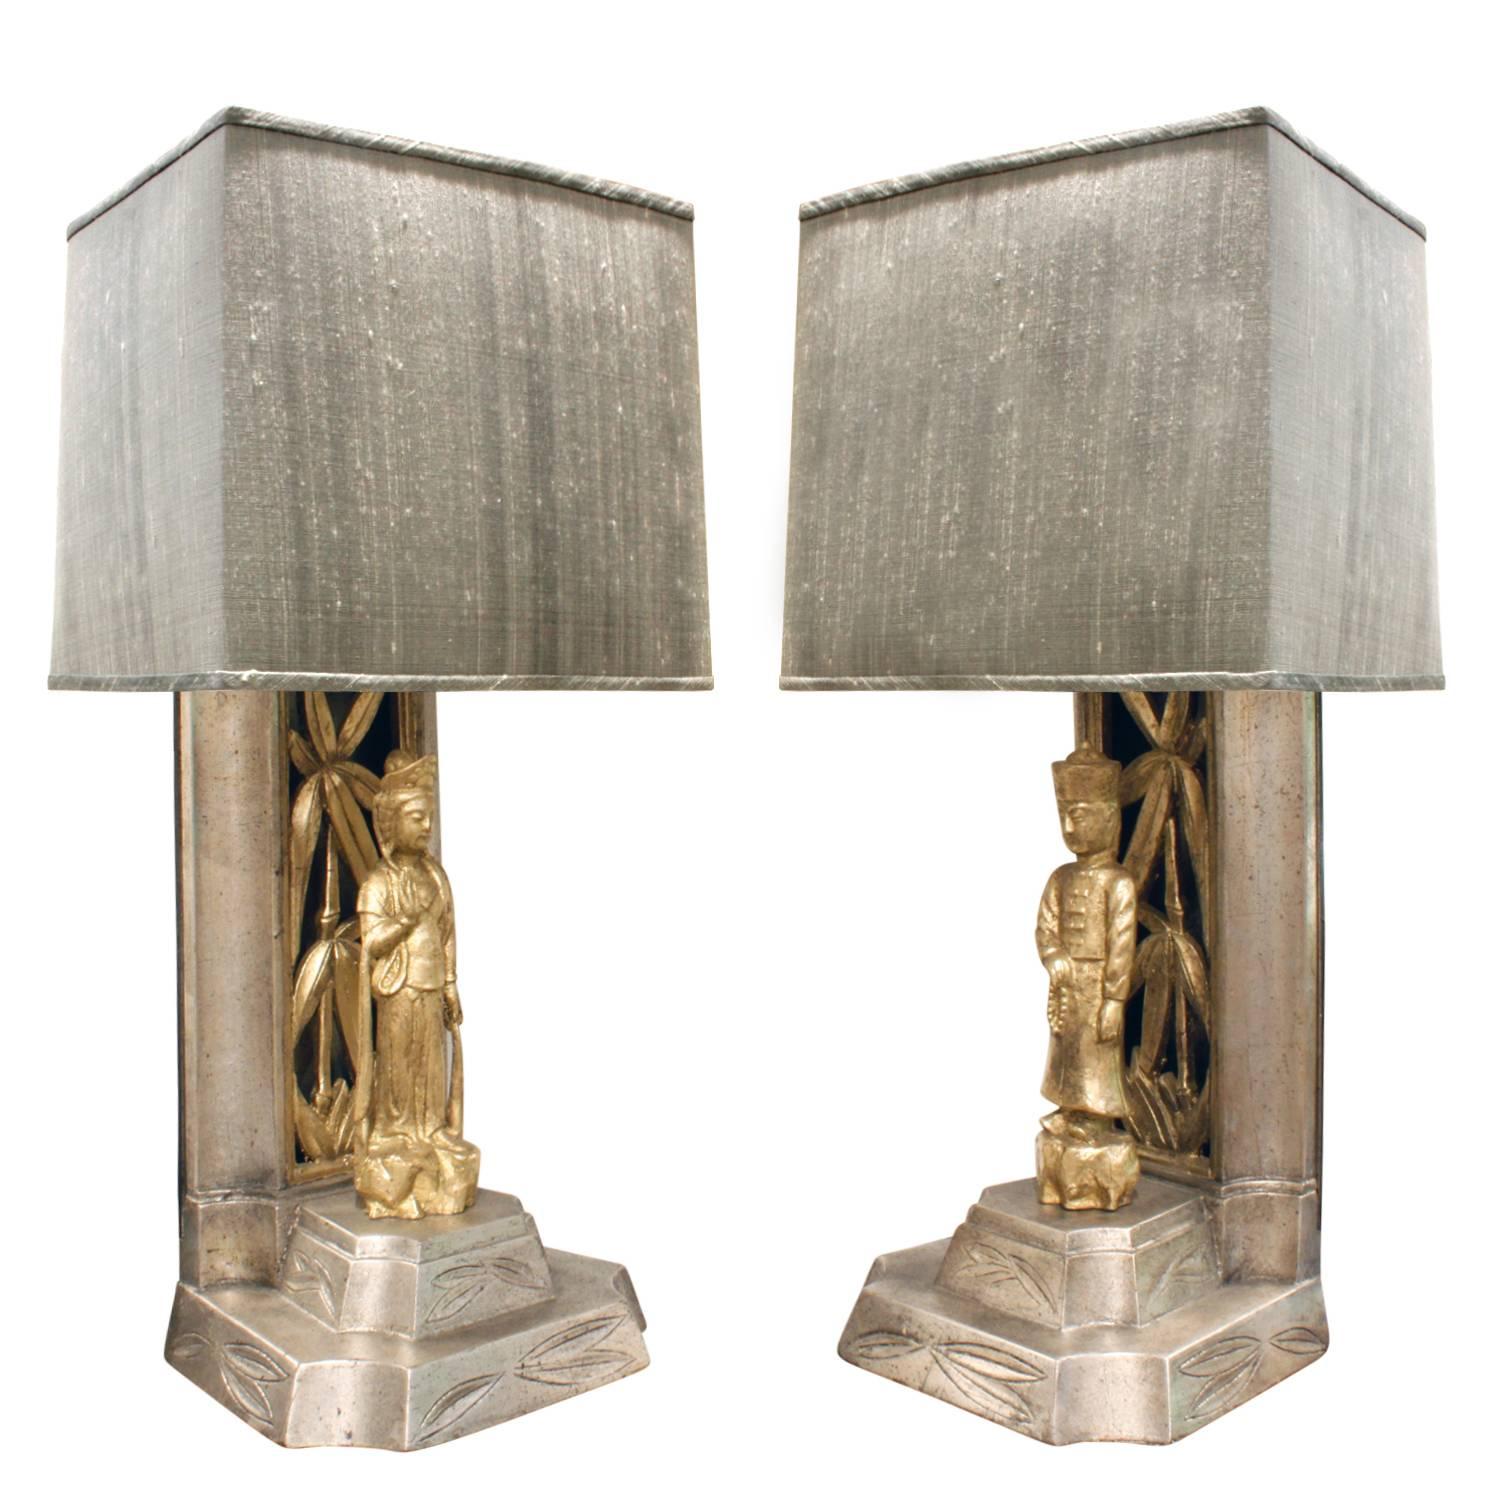 Pair of hand-carved table lamps with Chinese figures decorated in gold leaf and white gold leaf by James Mont, American, 1950s. New custom silk shades by Lobel Modern.  These iconic Mont lamps would make a beautiful addition to any room.